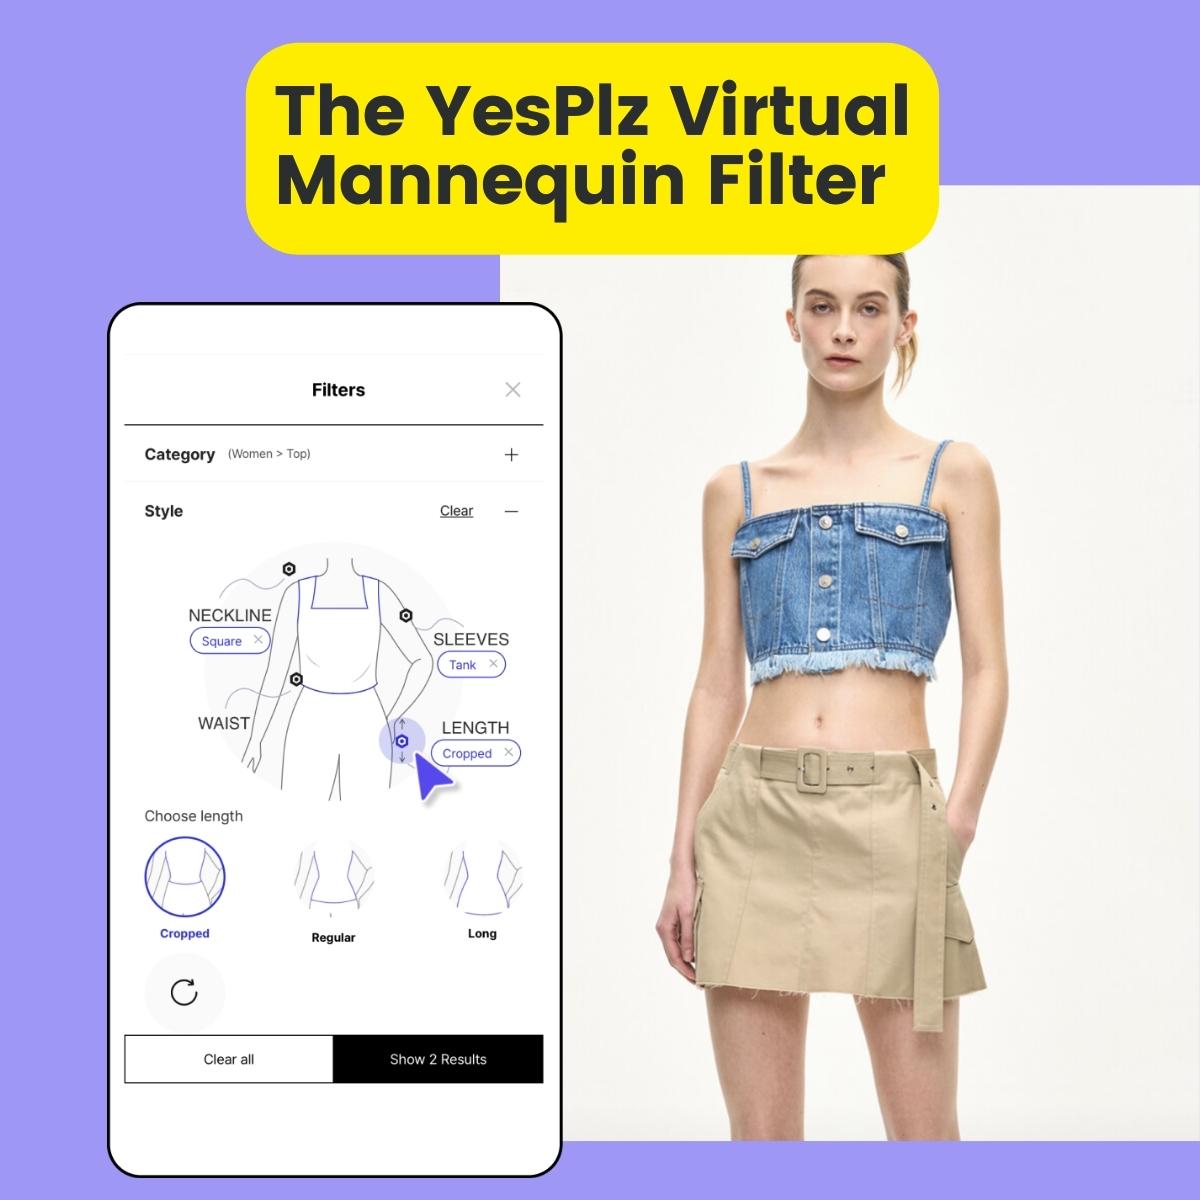 Virtual Mannequin Filter using fashion AI--an image of a model against a purple background